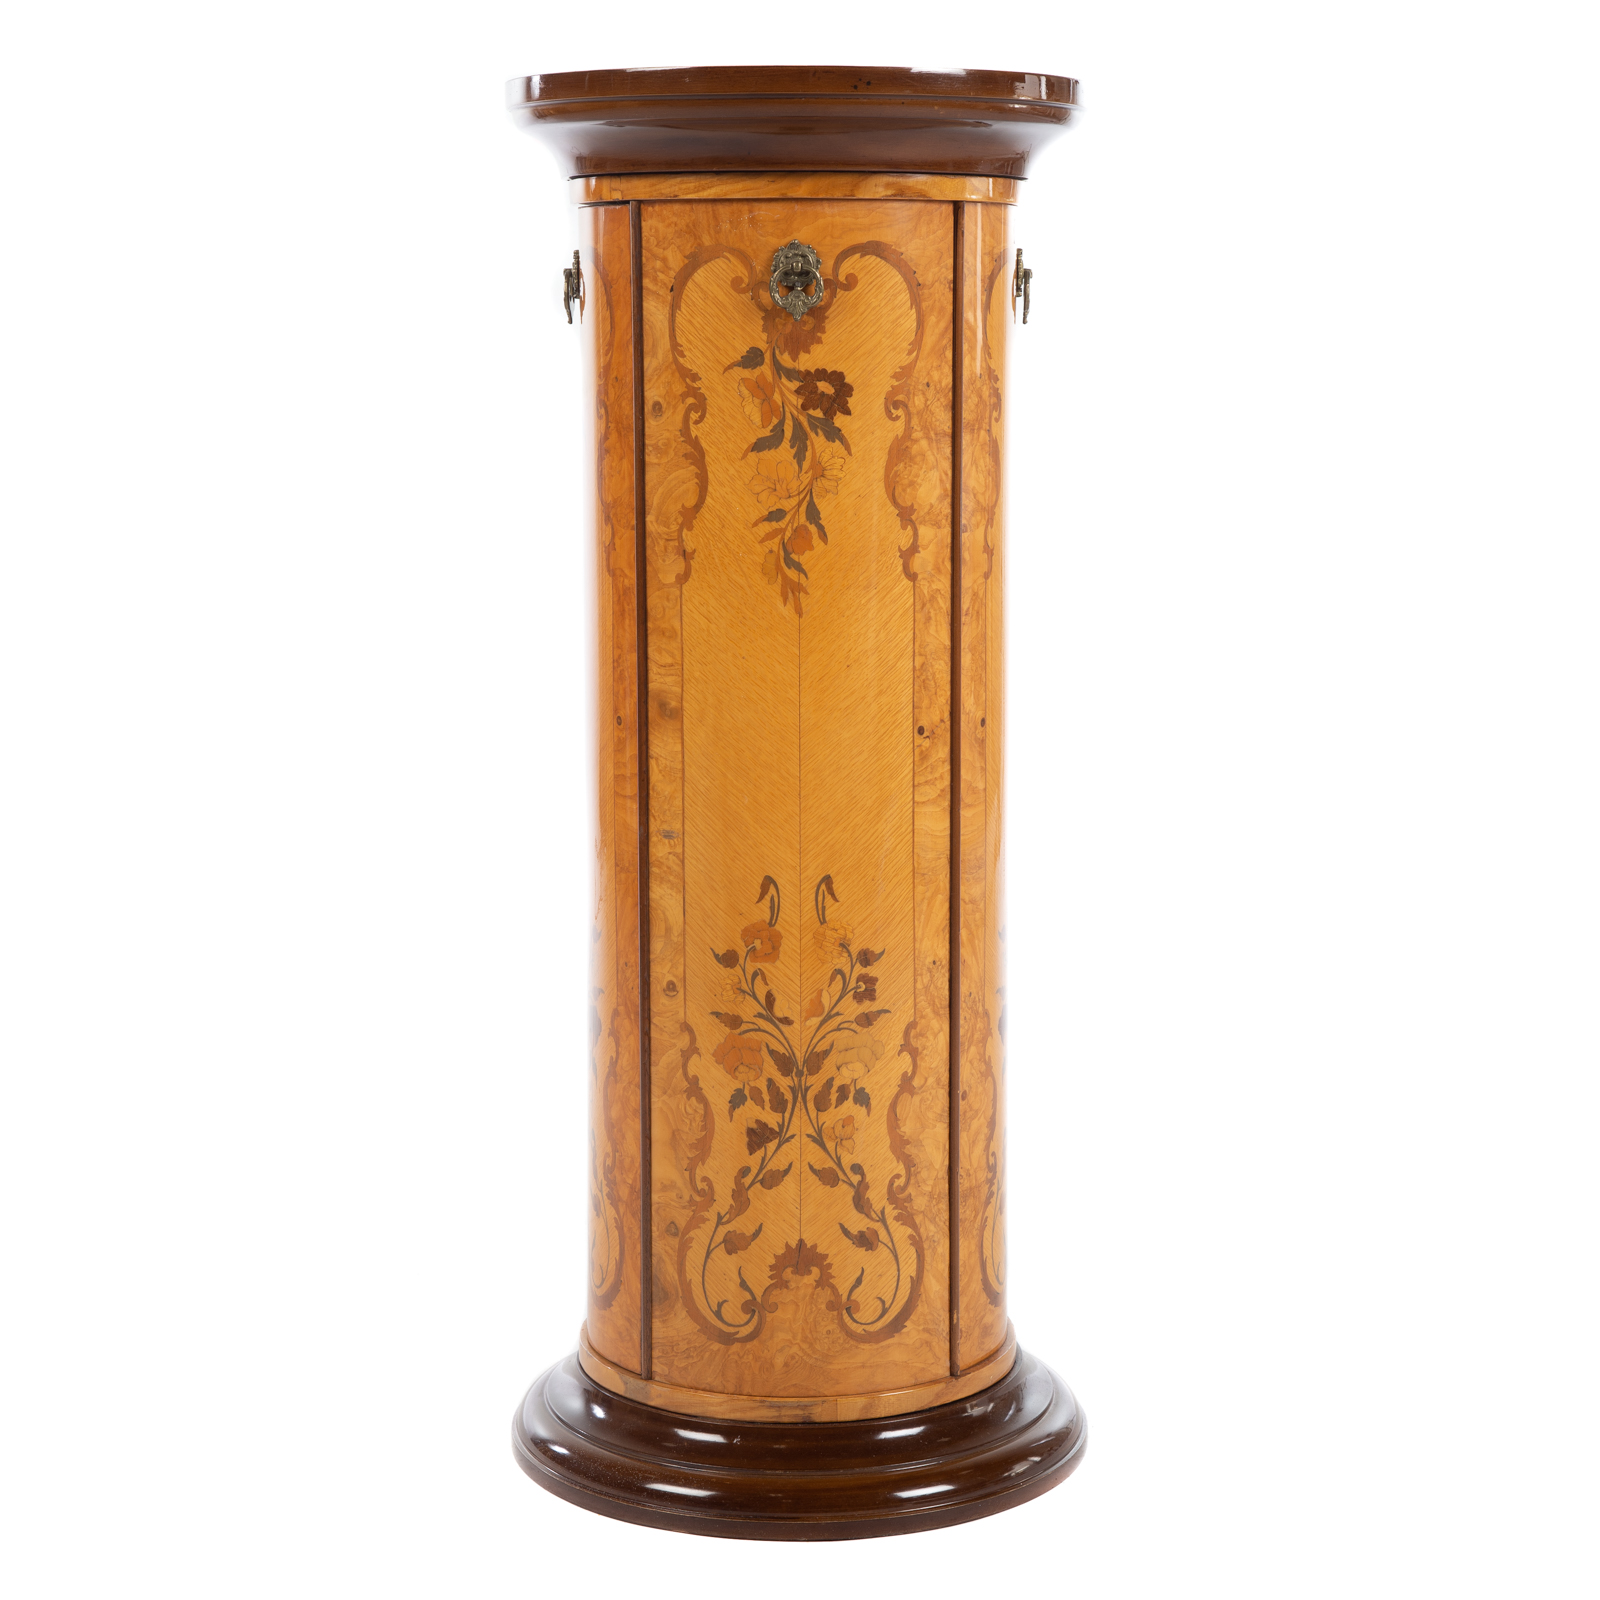 ITALIAN MARQUETRY INLAID CYLINDRICAL